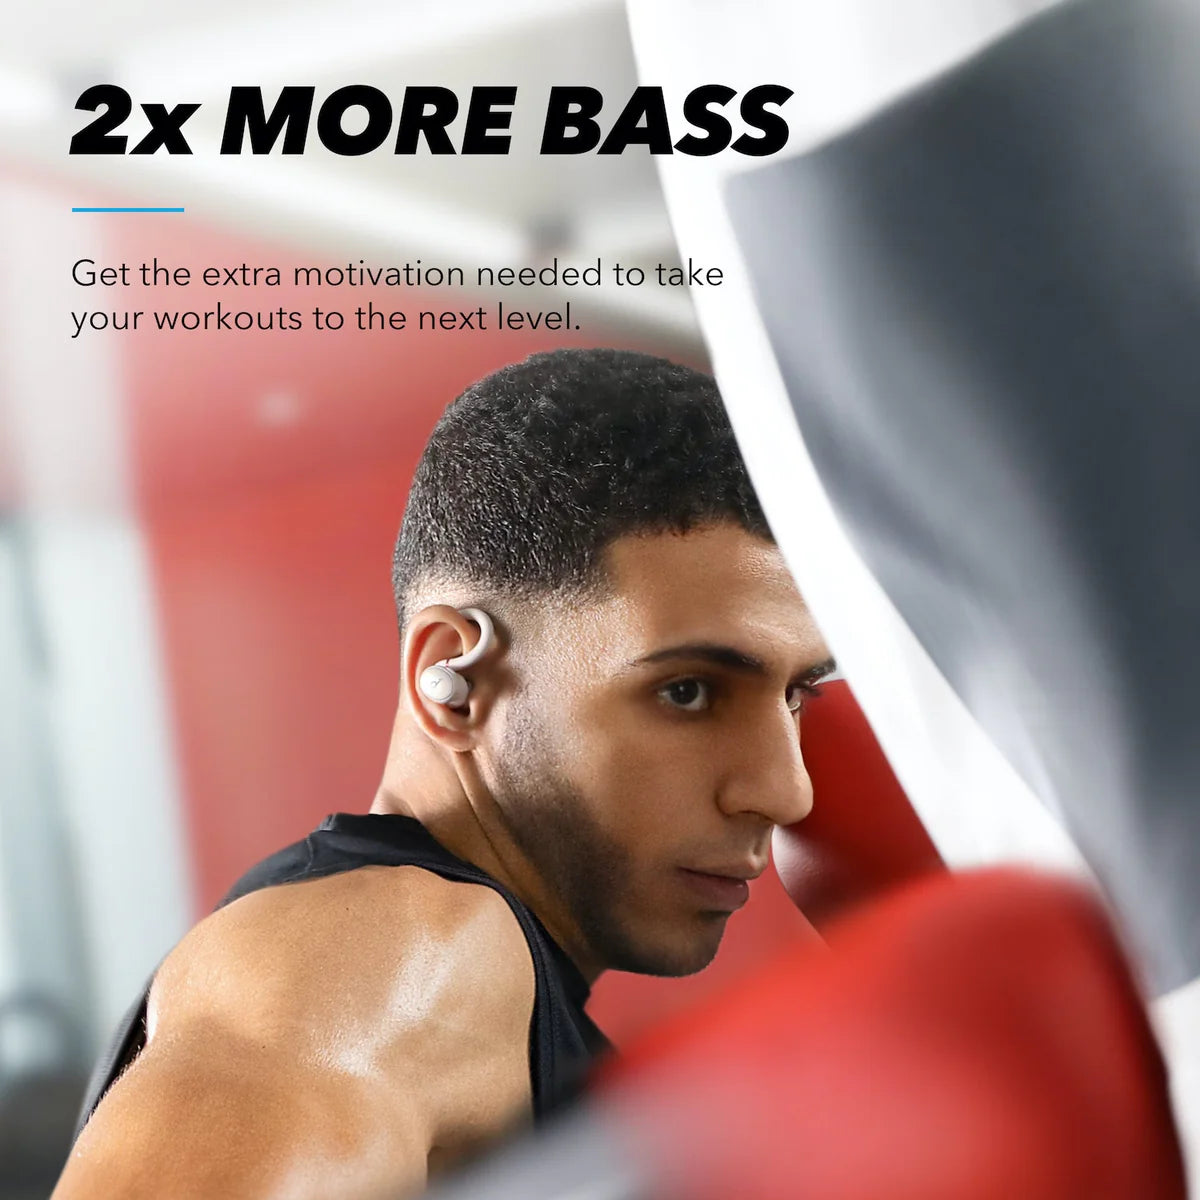 Sport X10 All-New Workout Earbuds - soundcore US